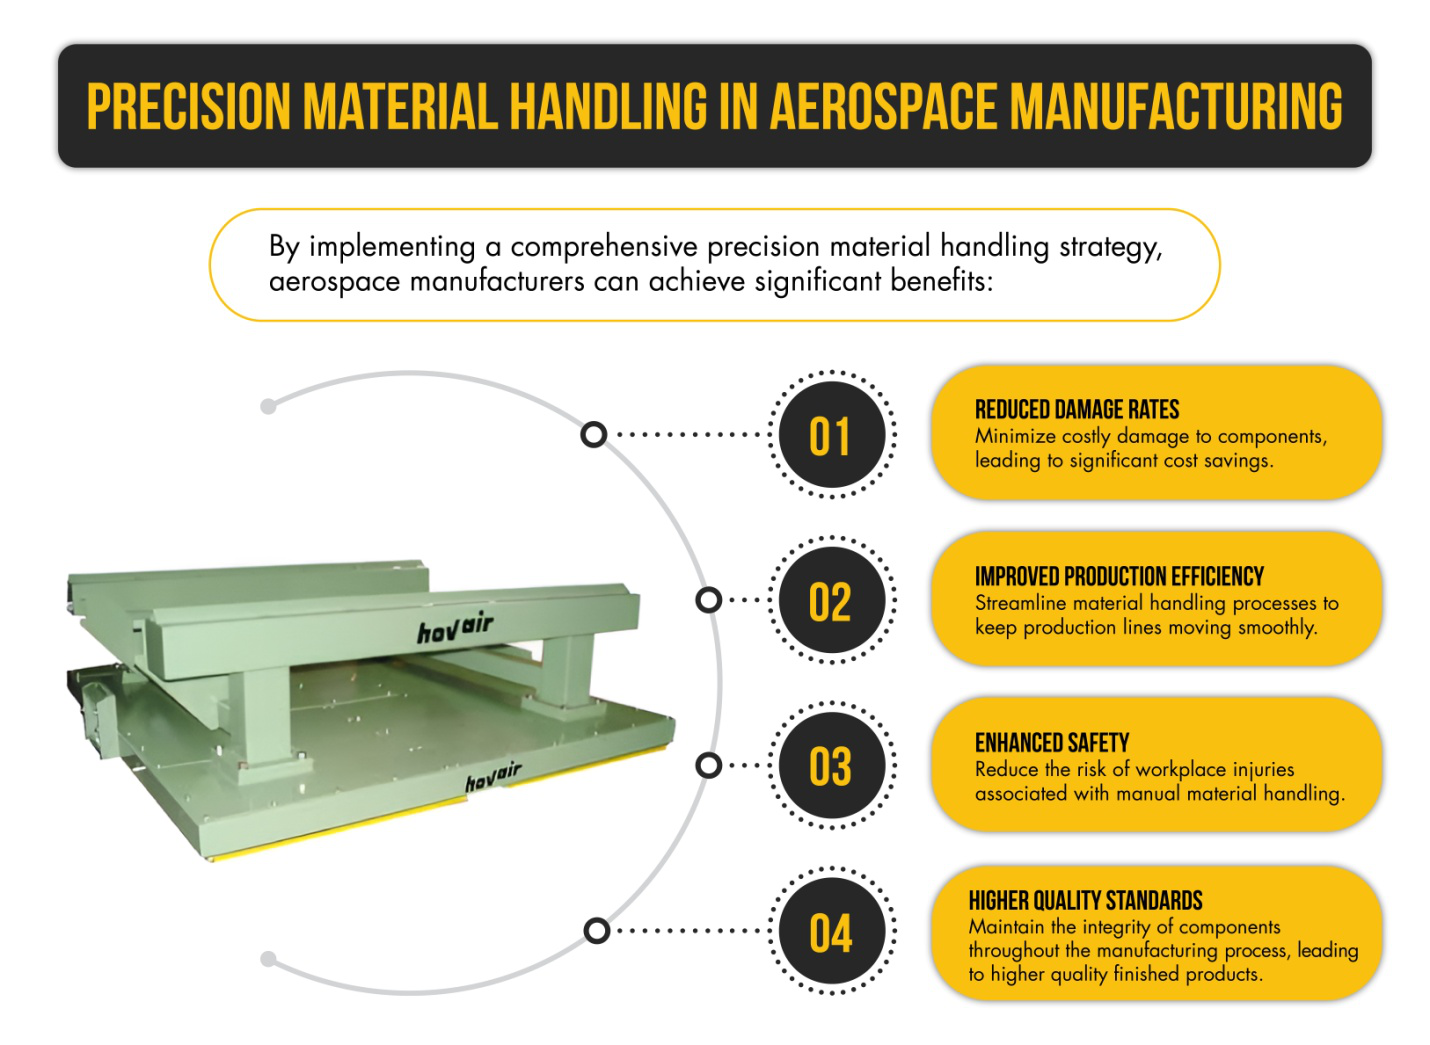 An infographic explaining precision material handling in aerospace manufacturing